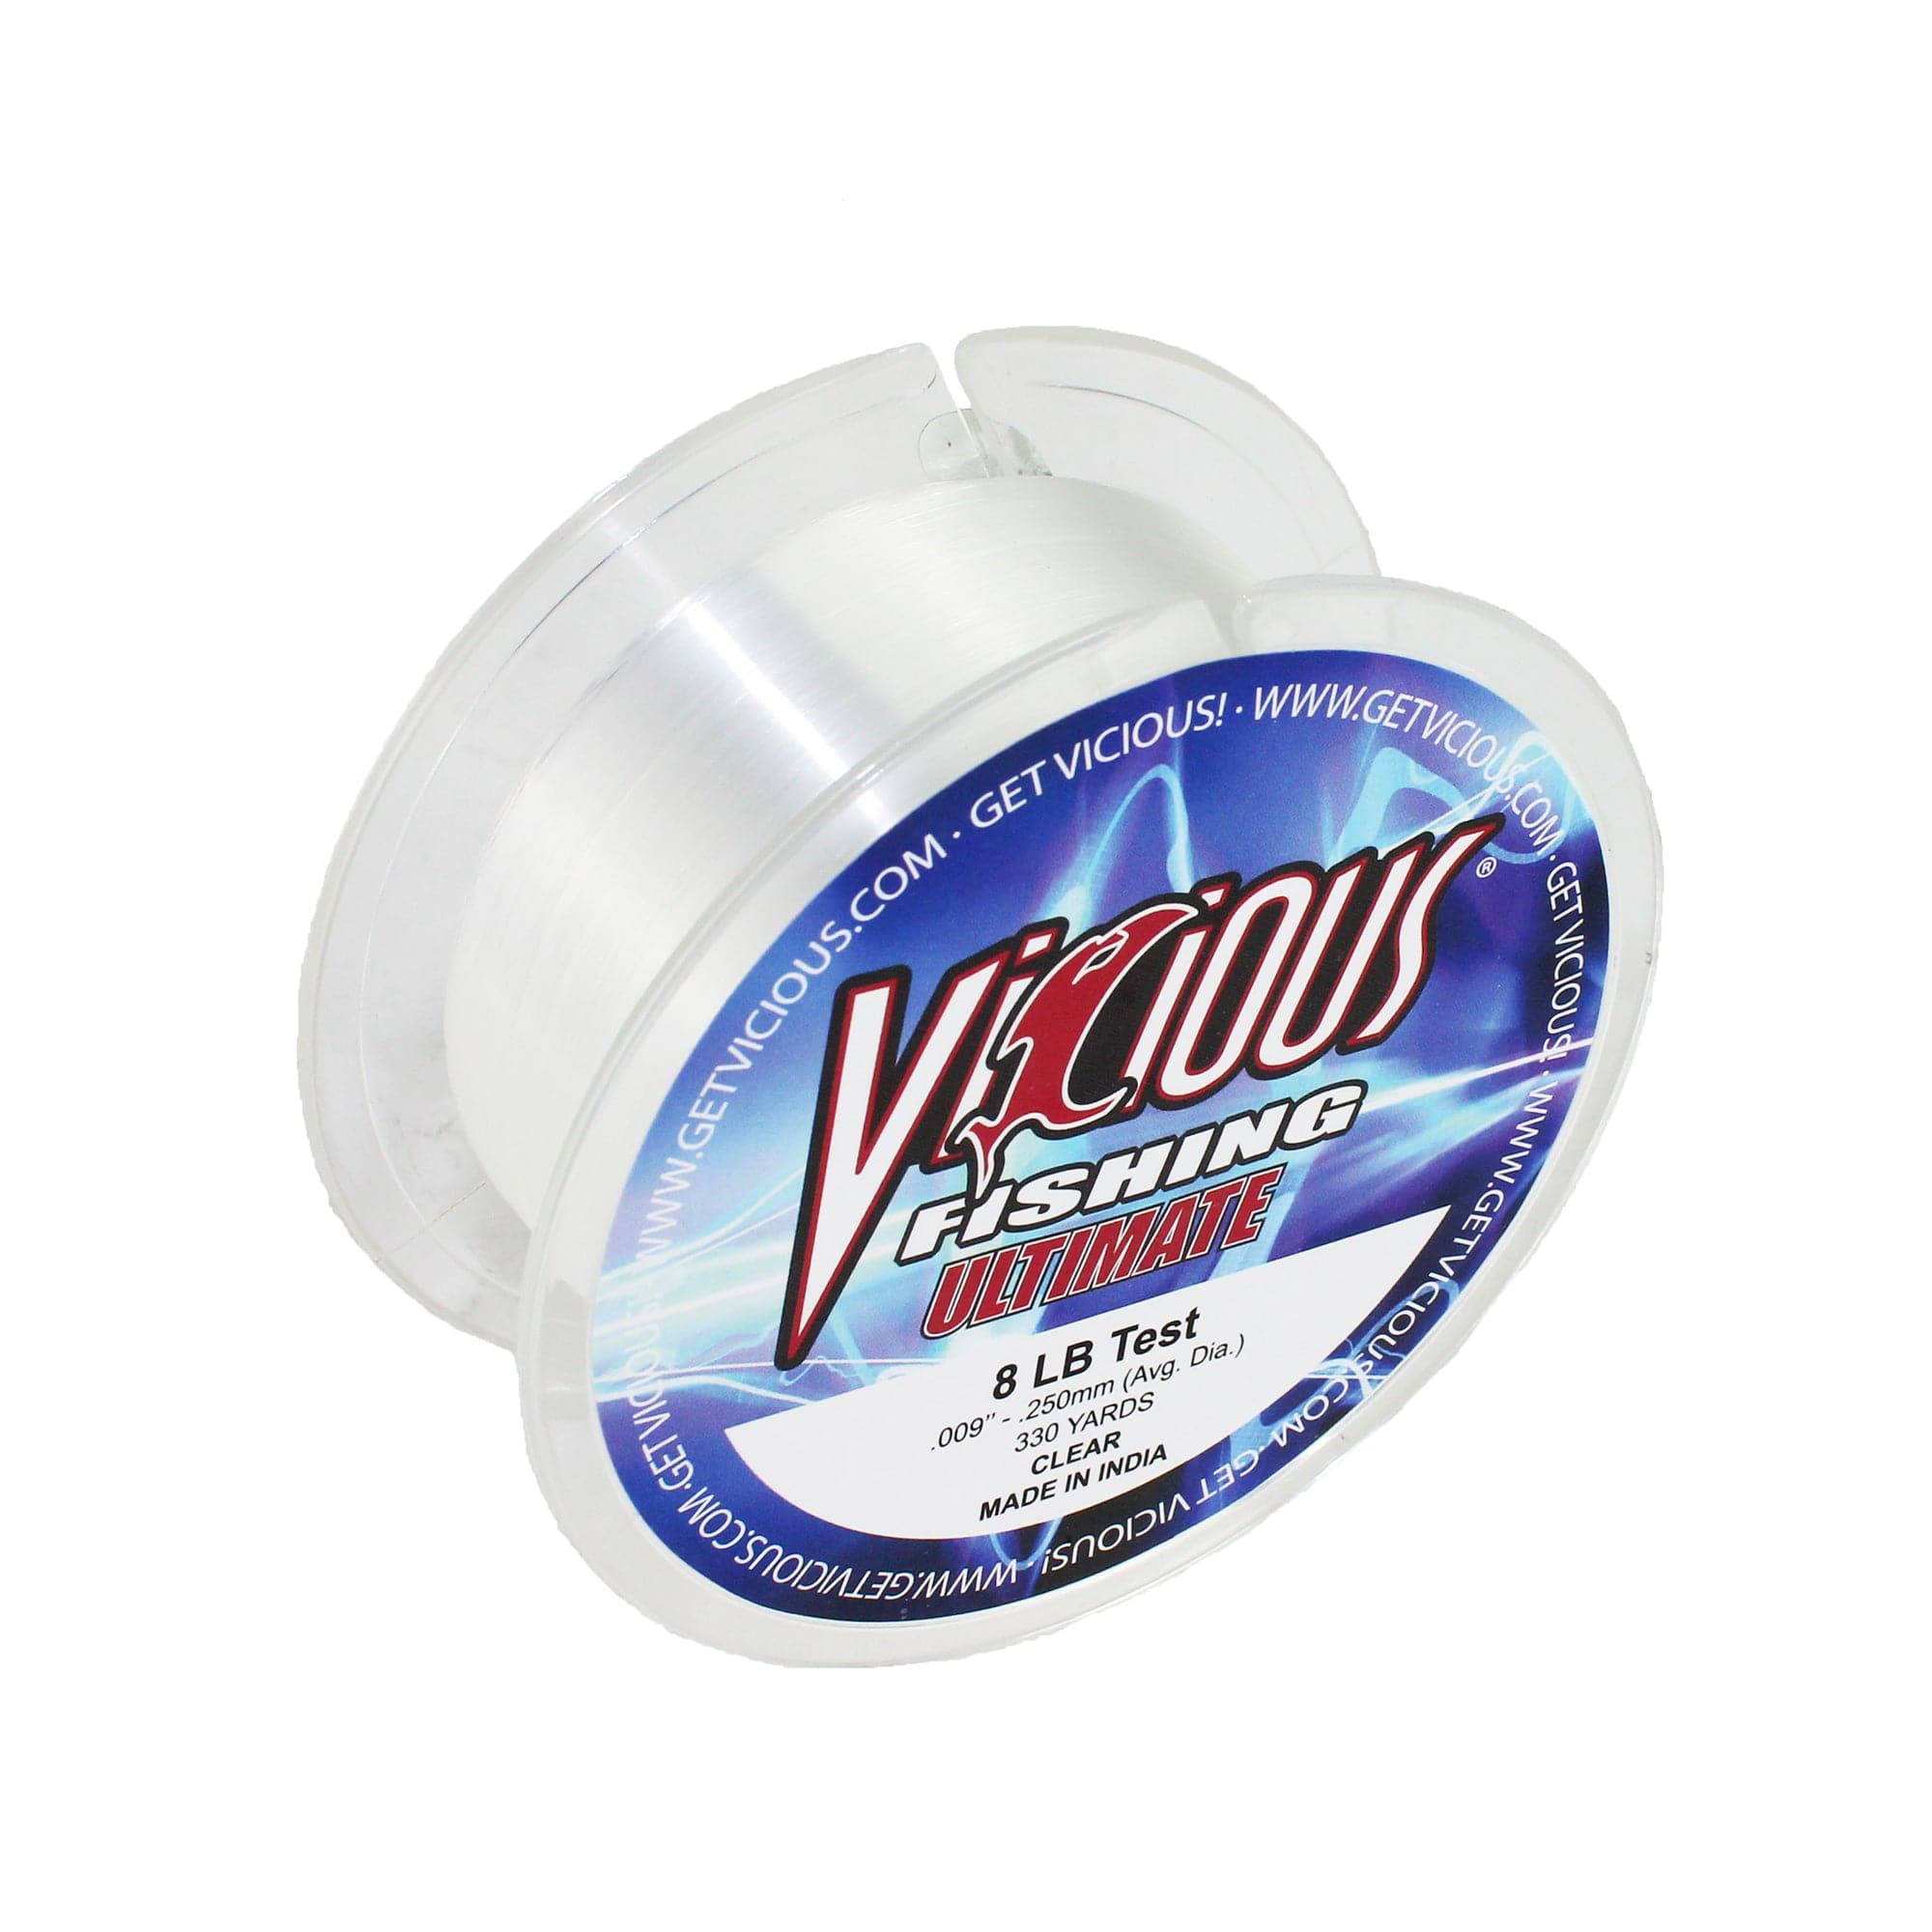 Vicious Fishing VCL Ultimate Monofilament Clear Fishing Line - 330 Yar